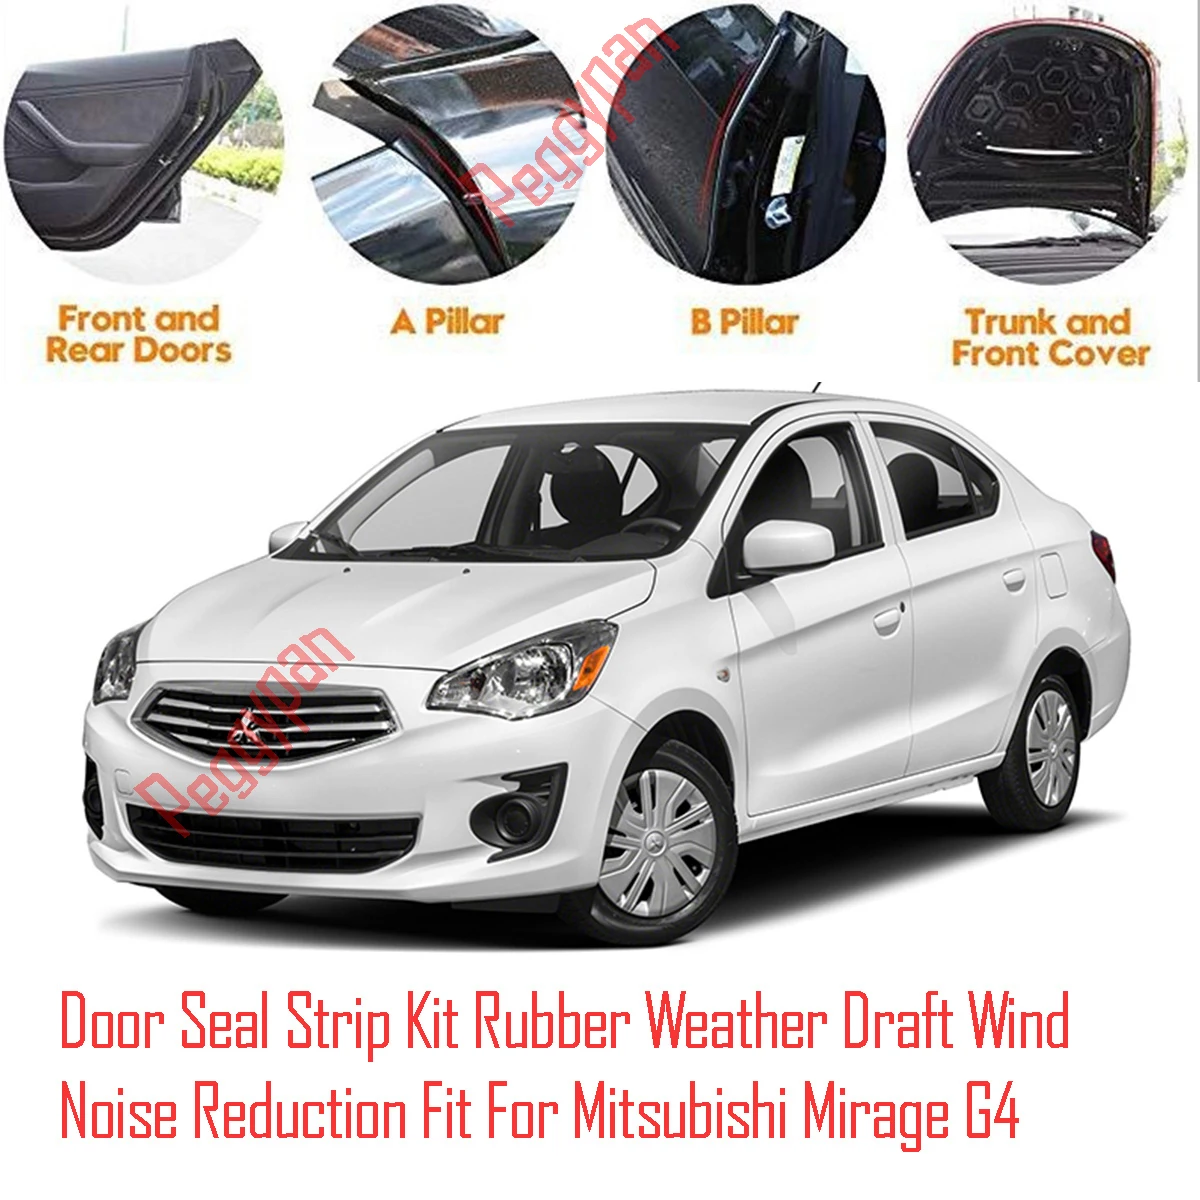 door-seal-strip-kit-self-adhesive-window-engine-cover-rubber-weather-draft-wind-noise-reduction-for-mitsubishi-mirage-g4